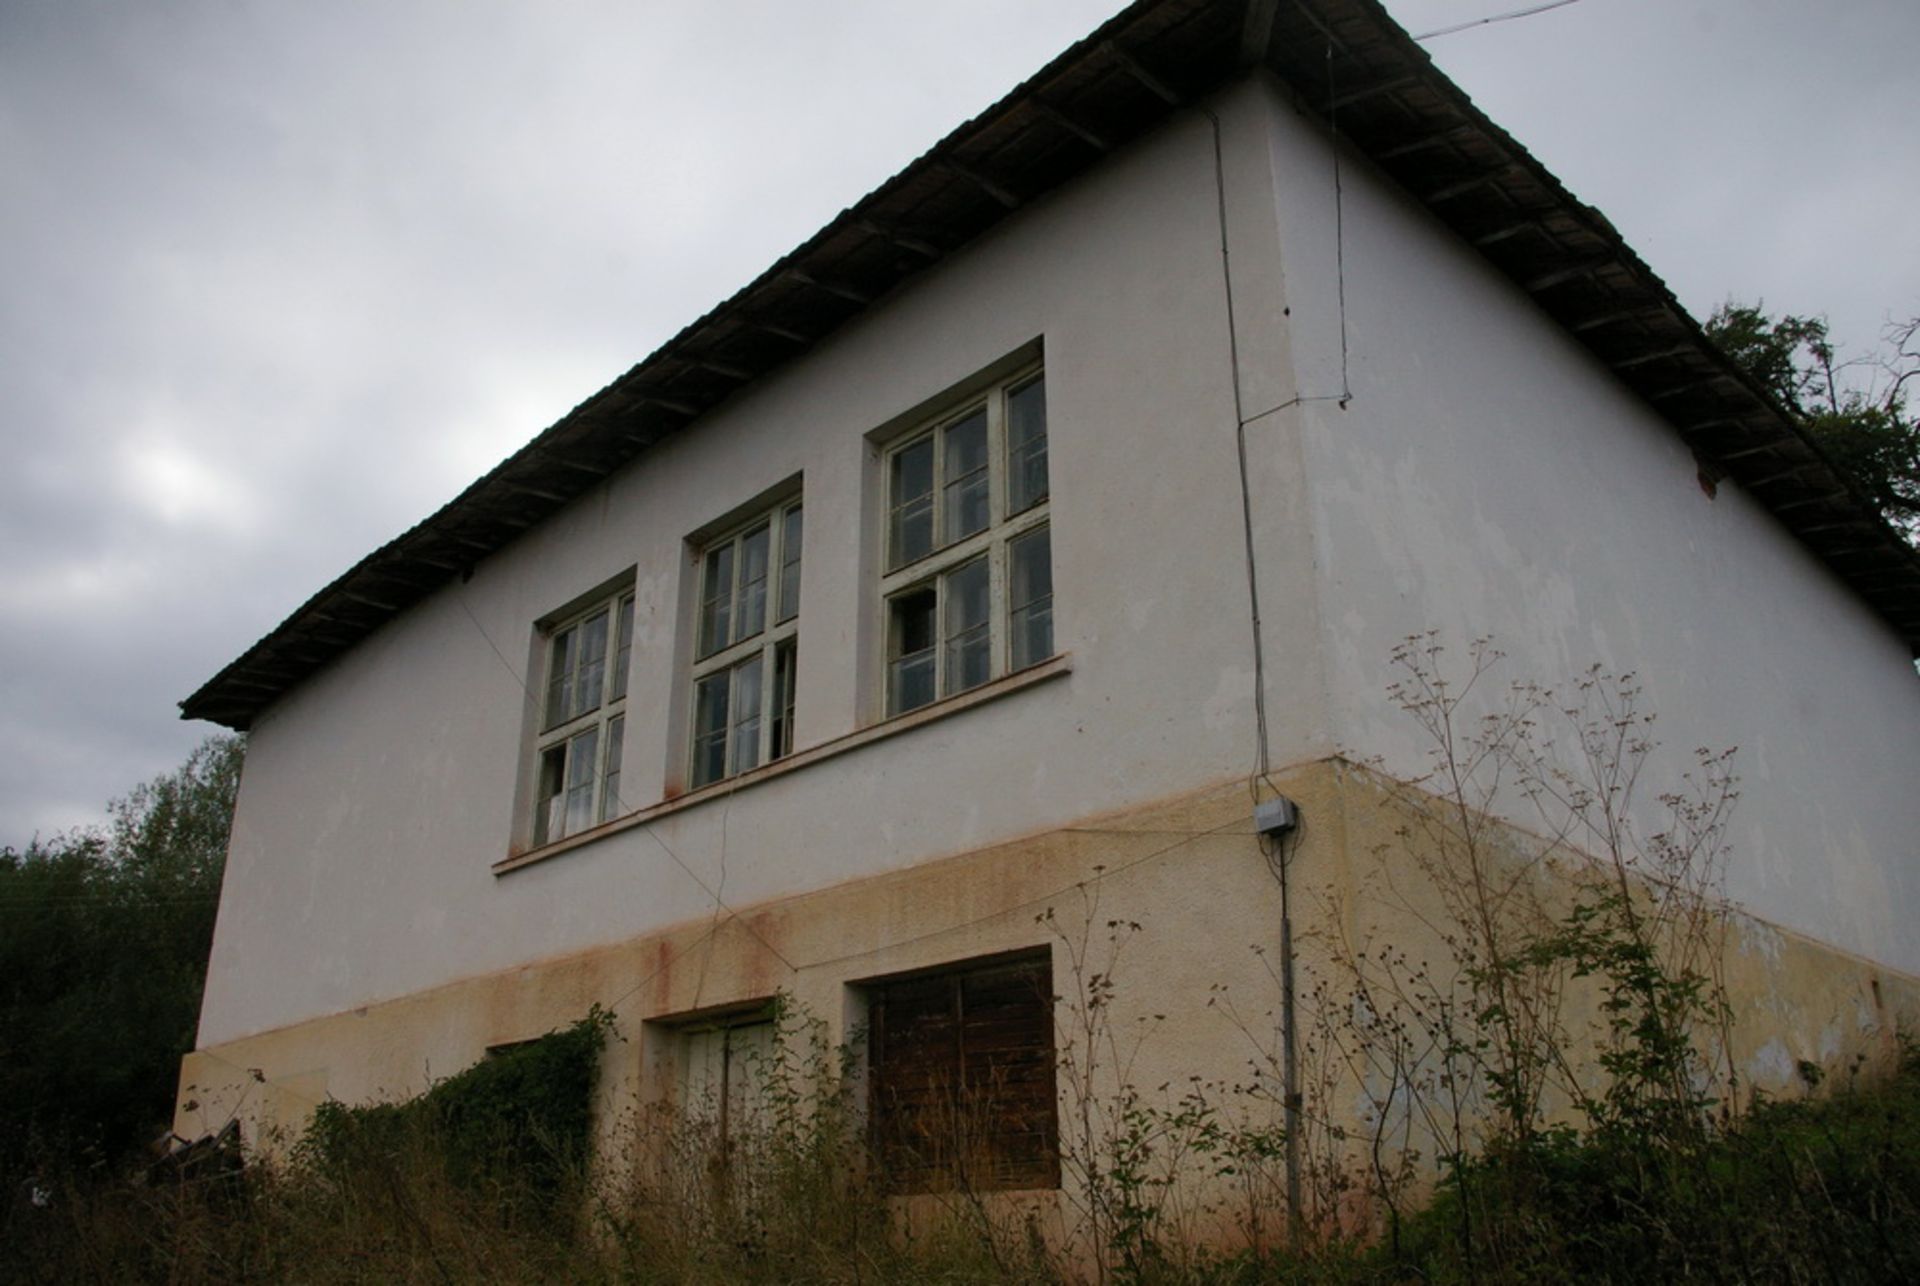 BD - Former state school with mountain views - one hour to the capital, Sofia + 2,000 sqm land - Bild 8 aus 17